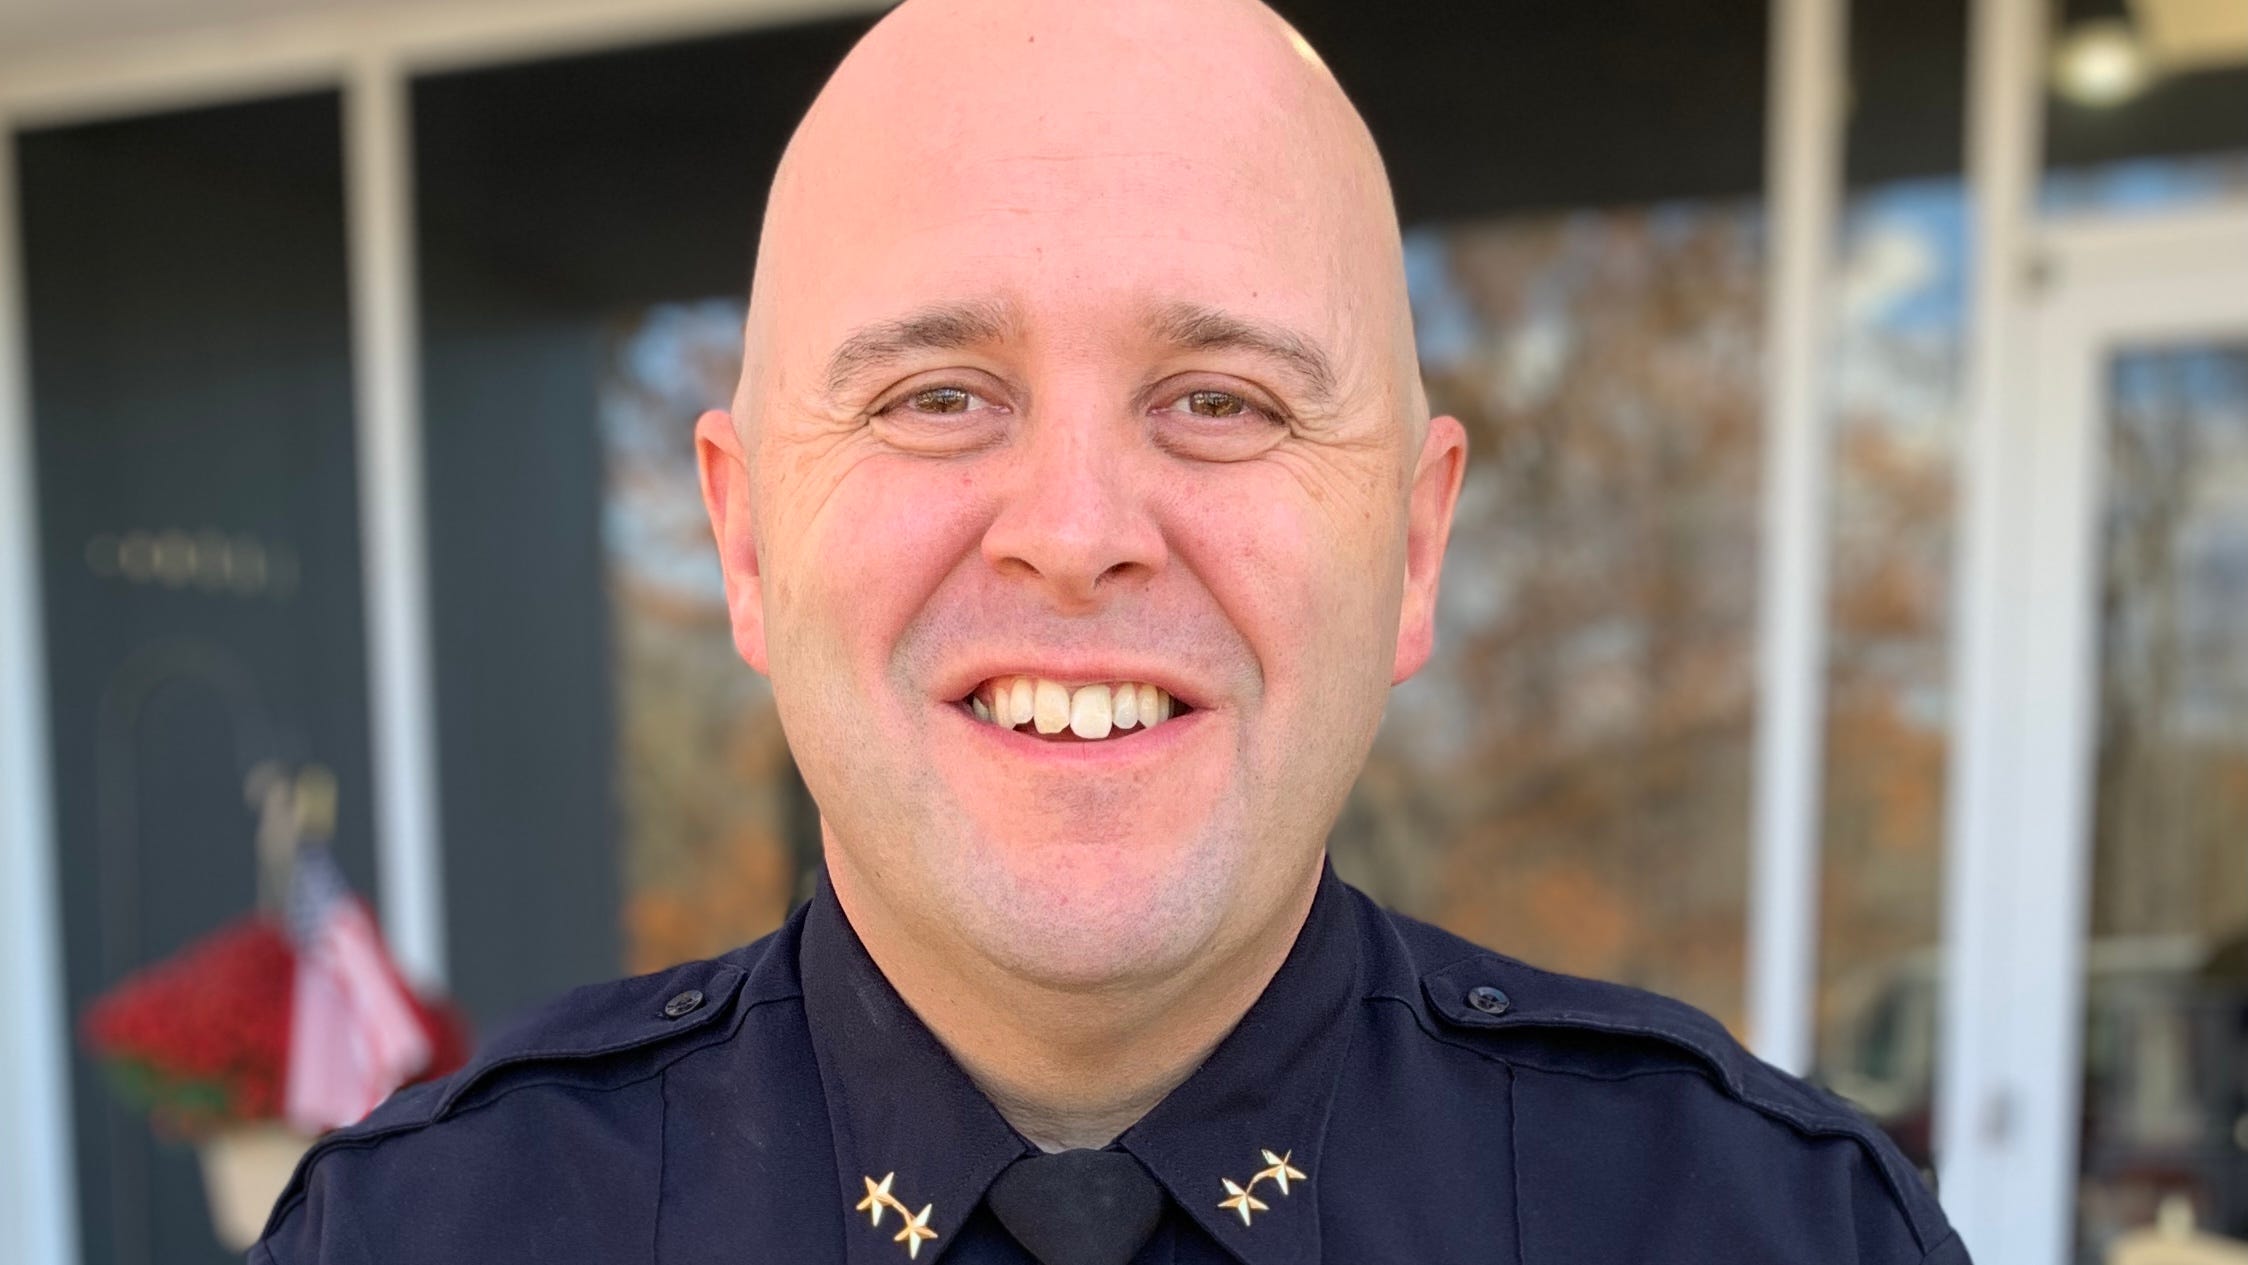 Montgomery Appoints Town Officer As New Police Chief